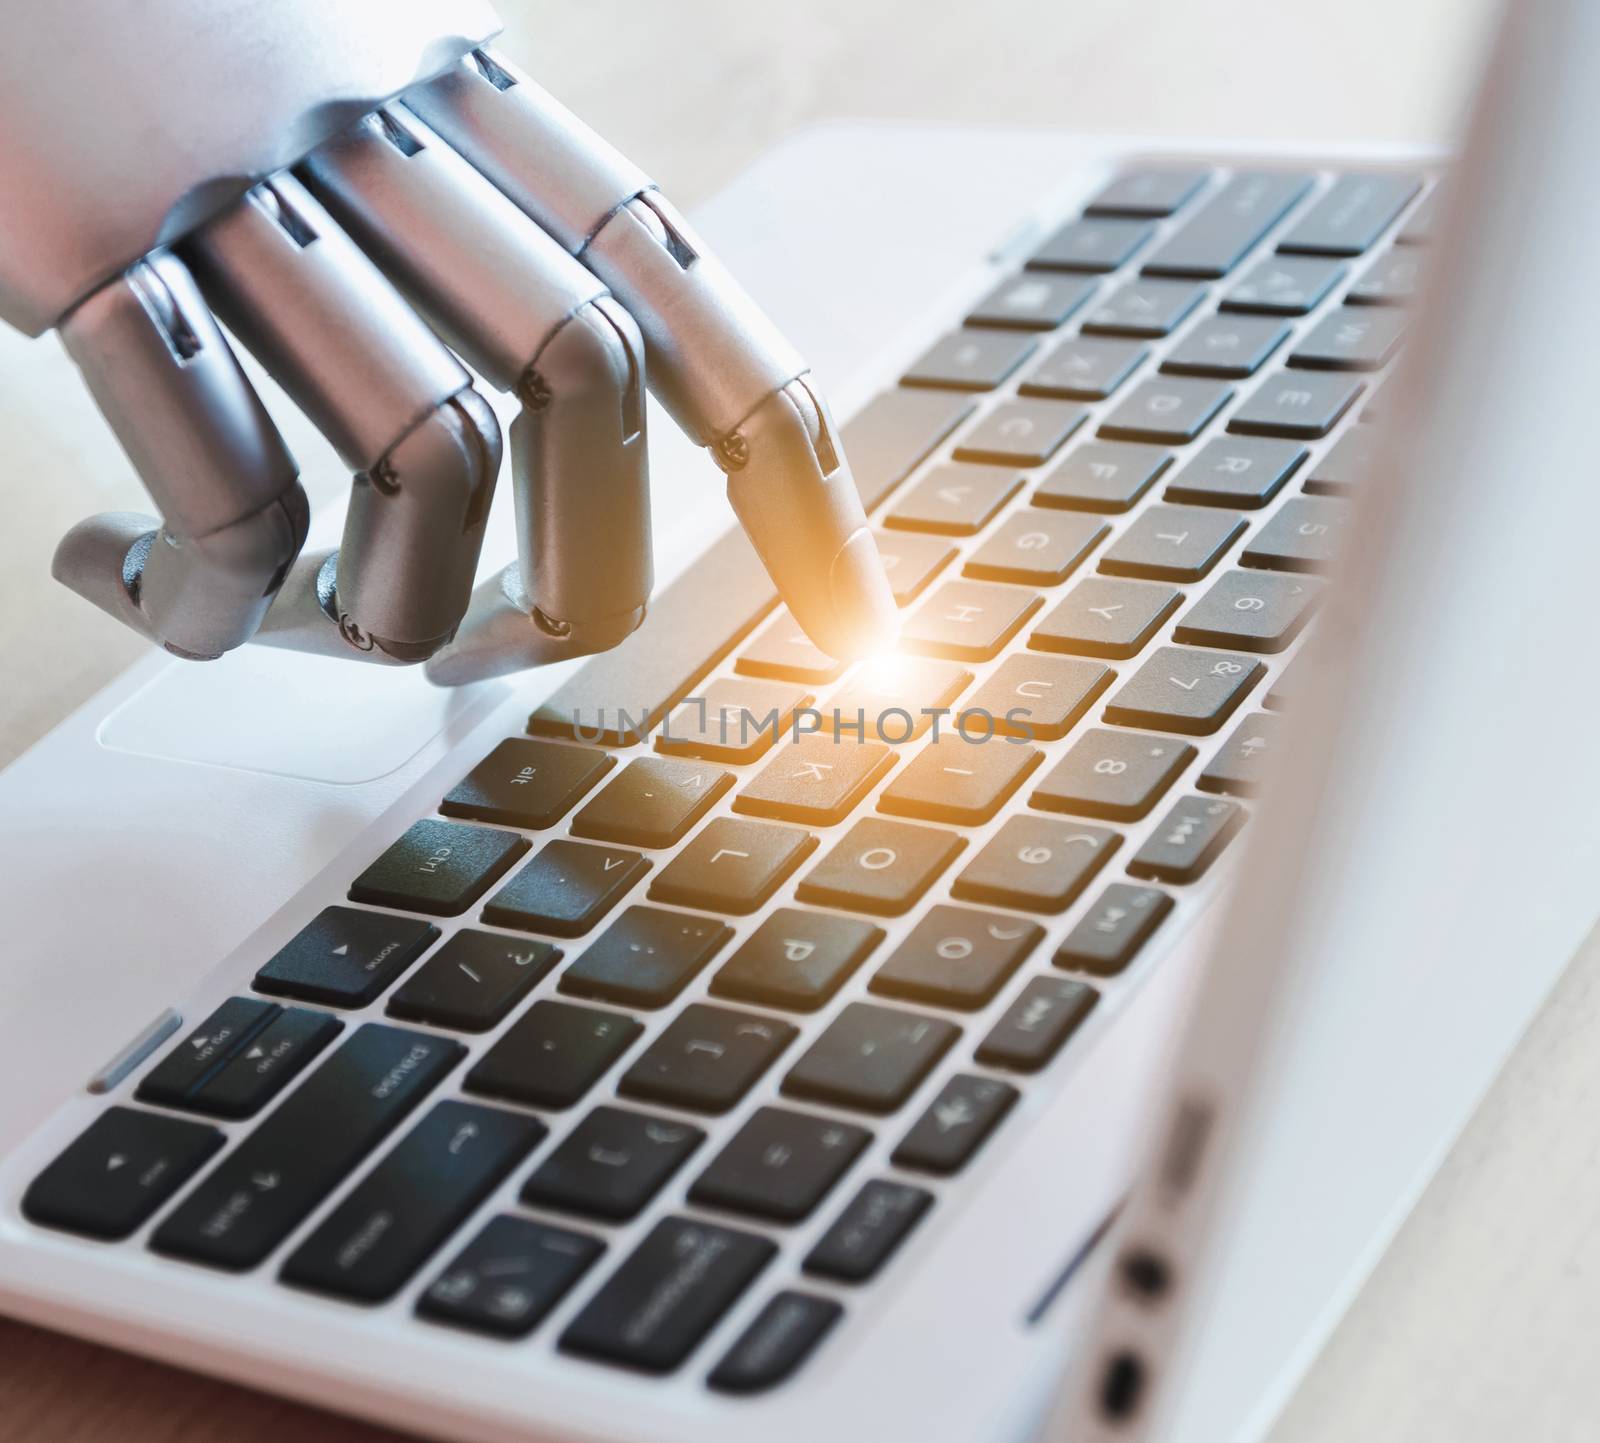 Robot hands and fingers point to laptop button advisor chatbot robotic artificial intelligence concept with light effect